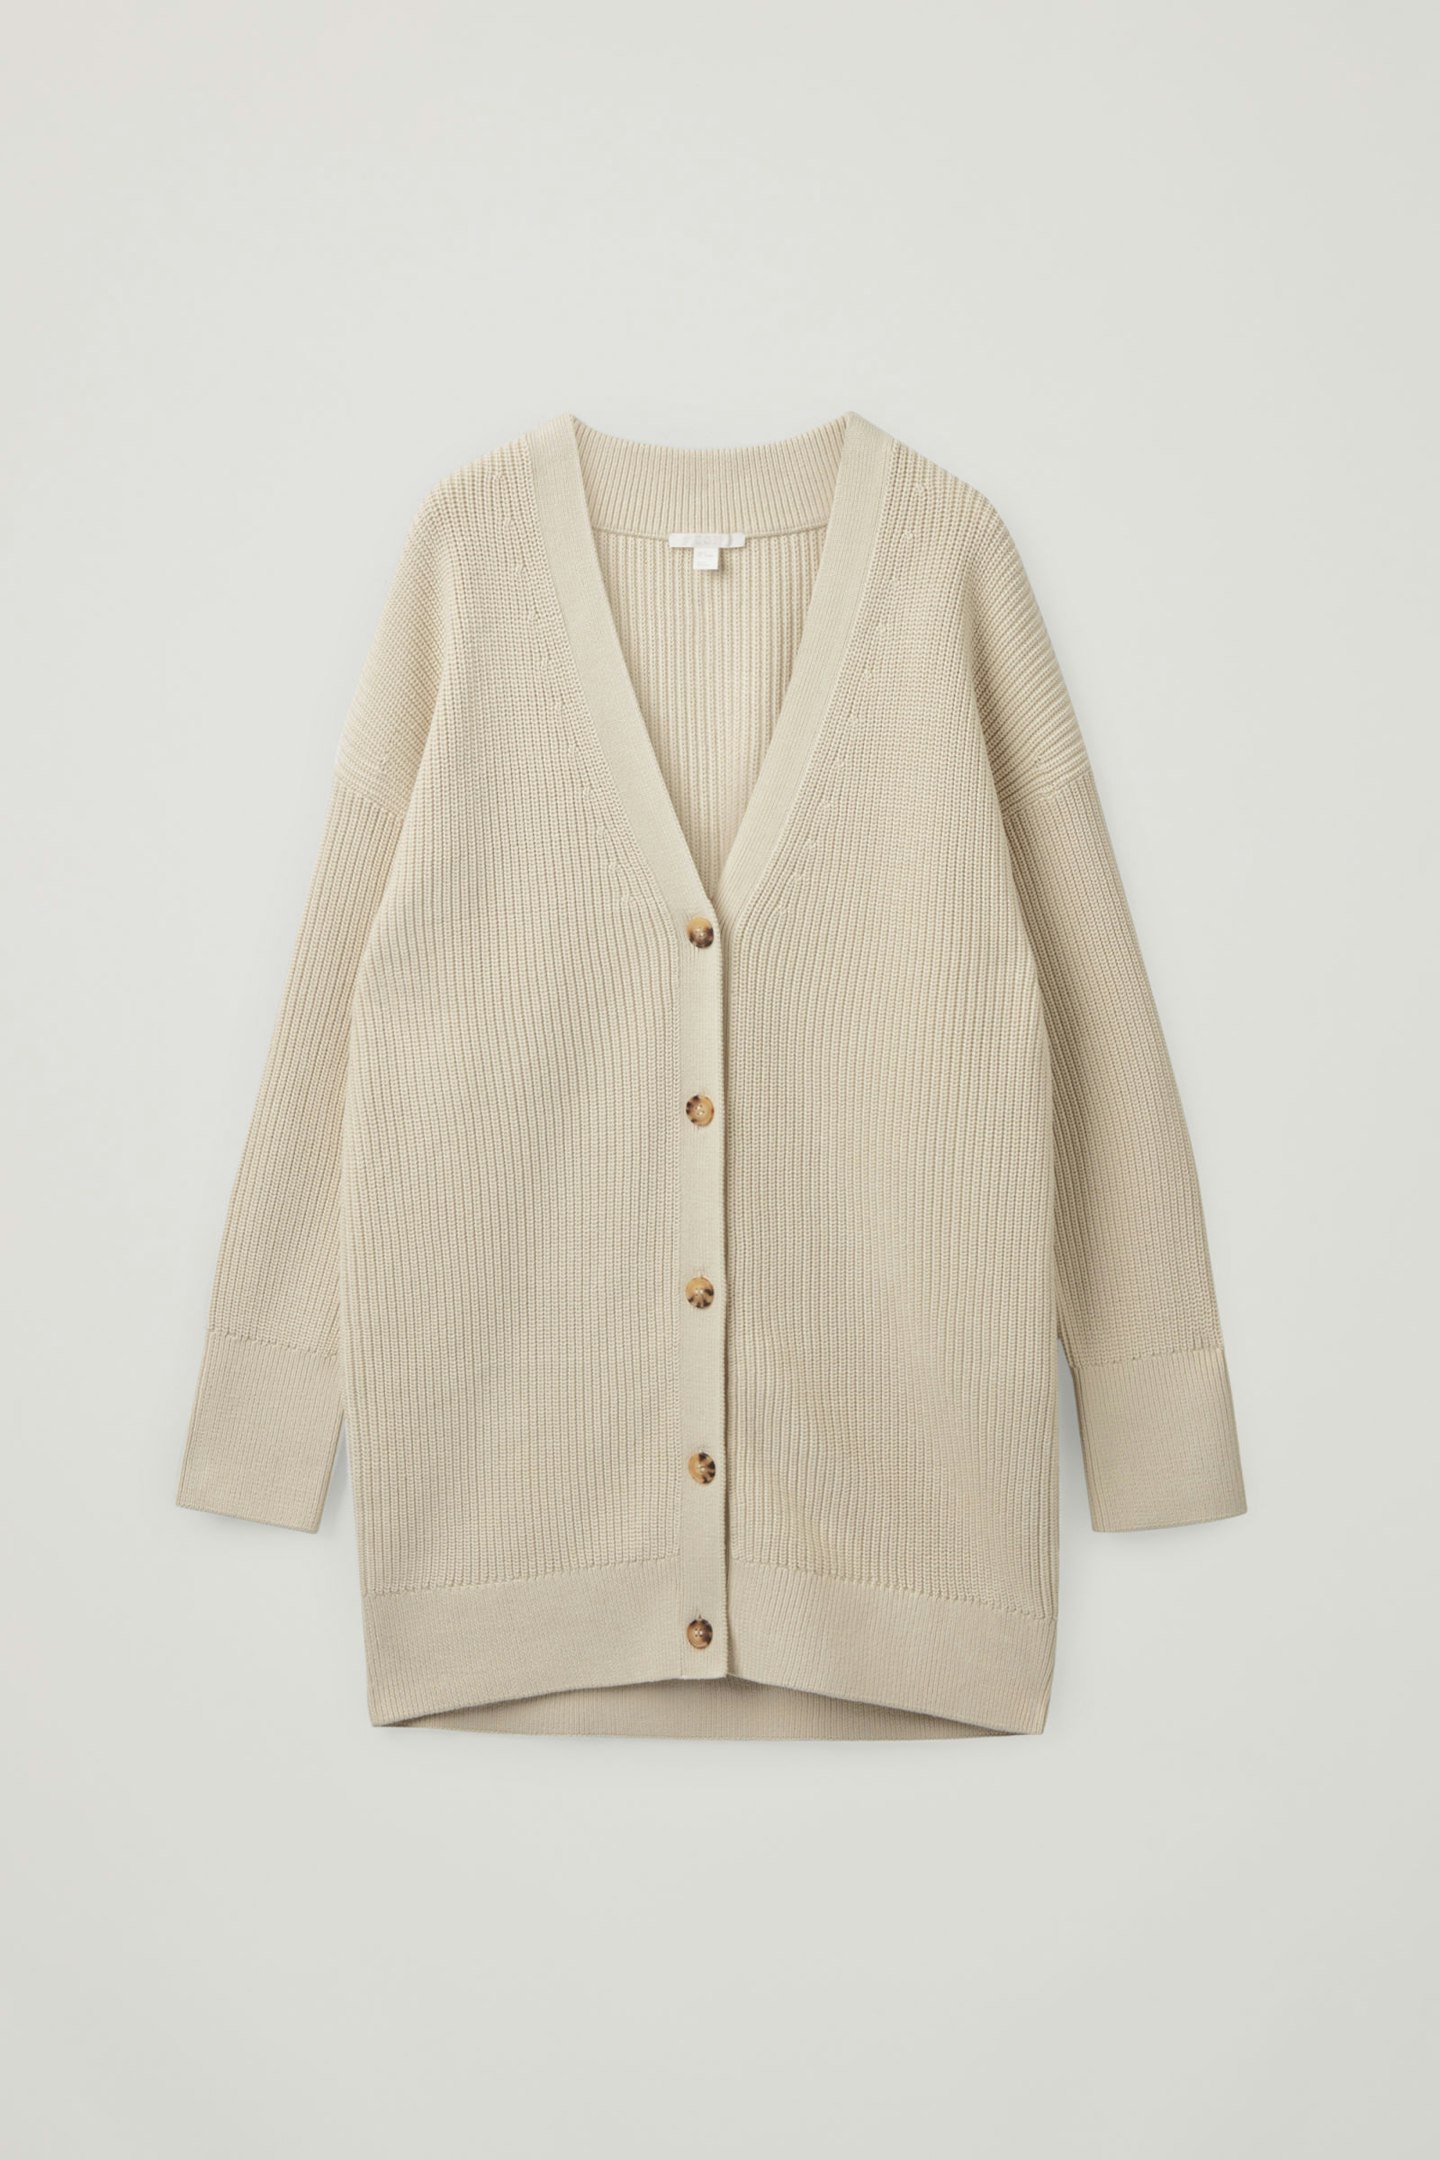 COS, Midi Knitted Cardigan, £69